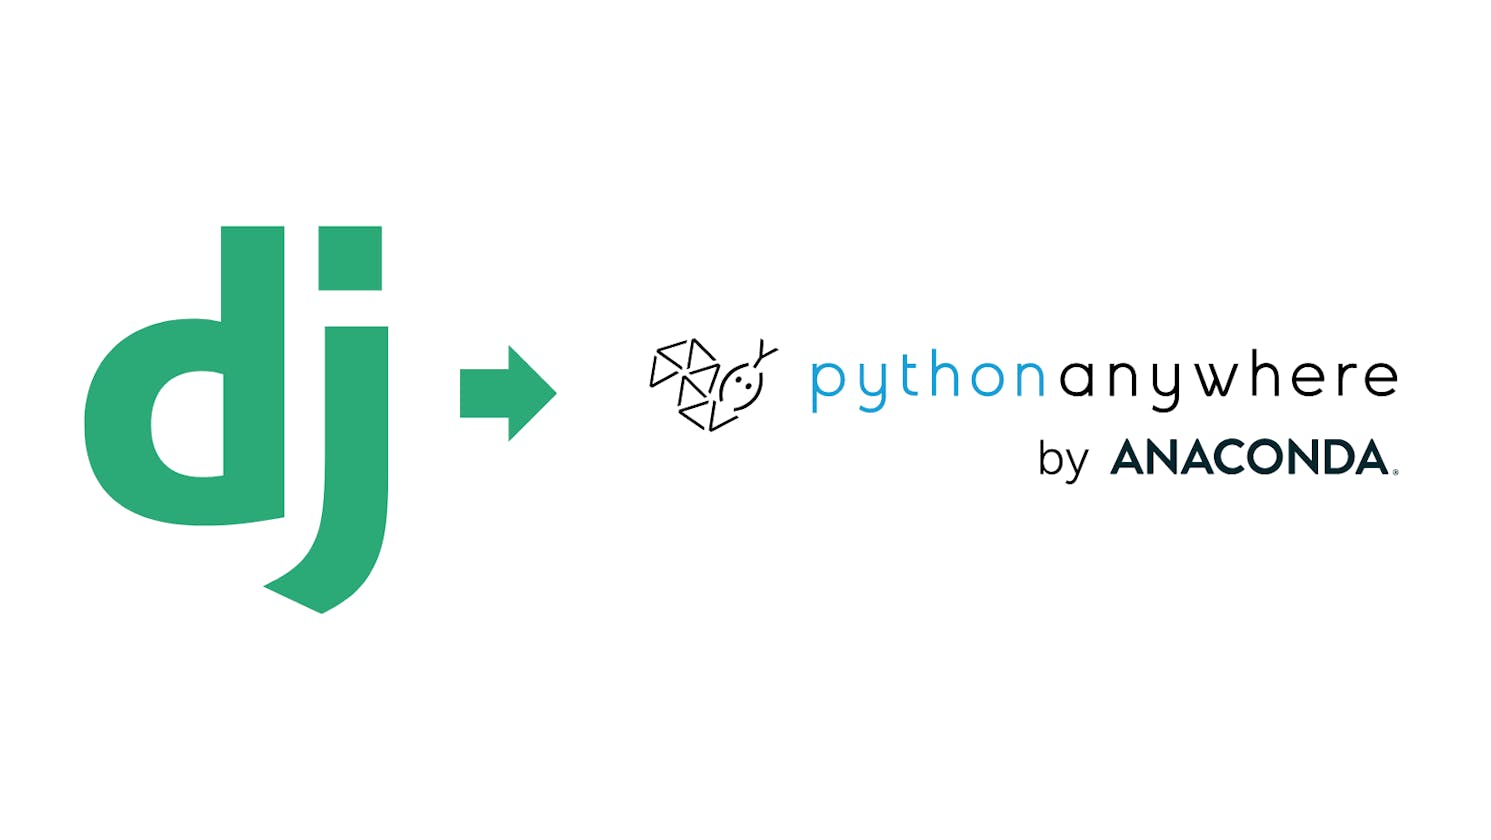 How To Deploy A Django Application on Python Anywhere